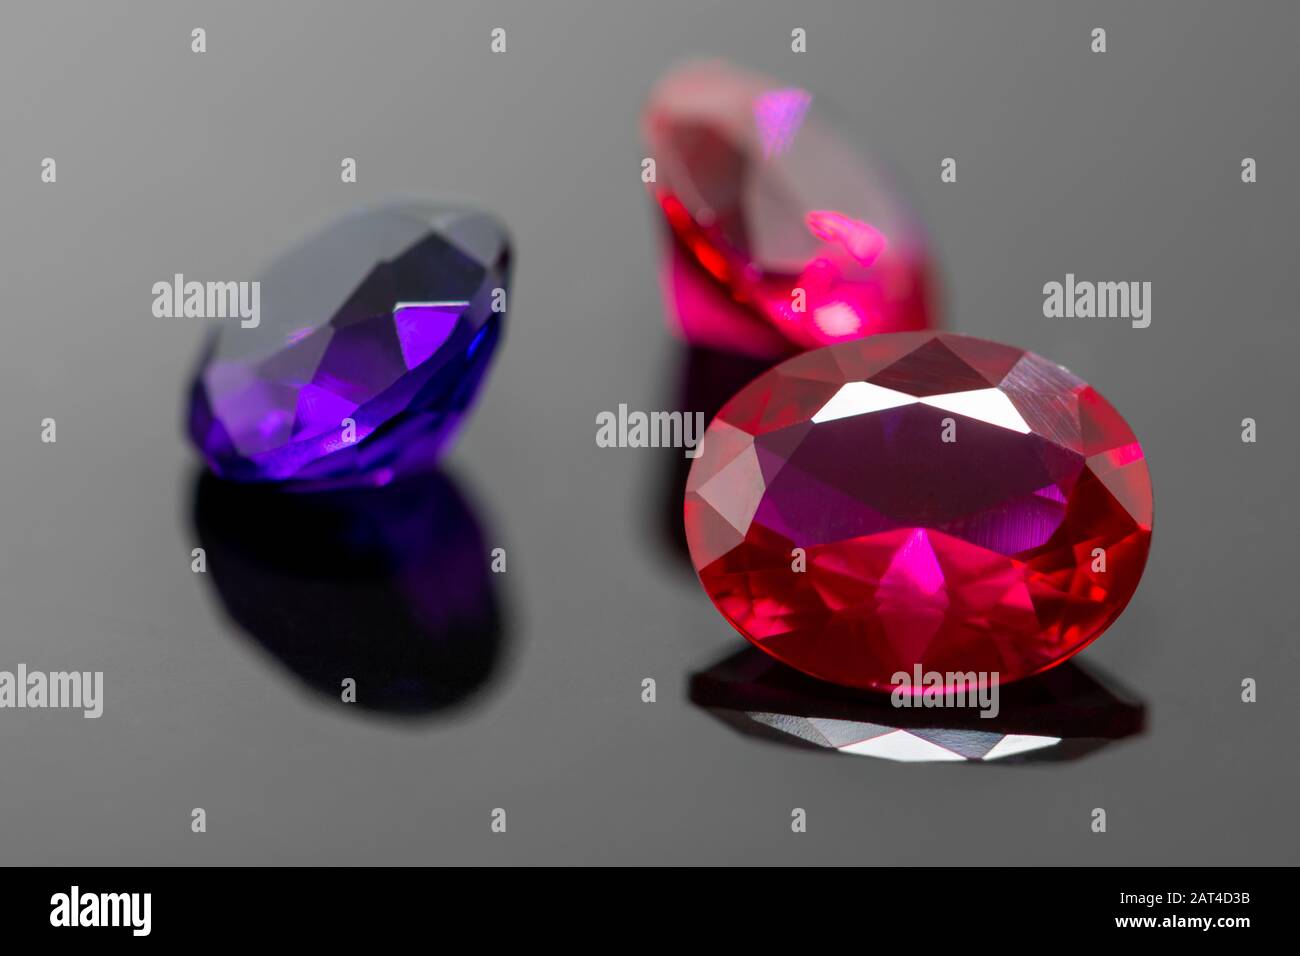 Macro view of oval red ruby gemstone with polishing streaks on black  reflective surface with blurred red ruby and purple amethyst in background  with c Stock Photo - Alamy